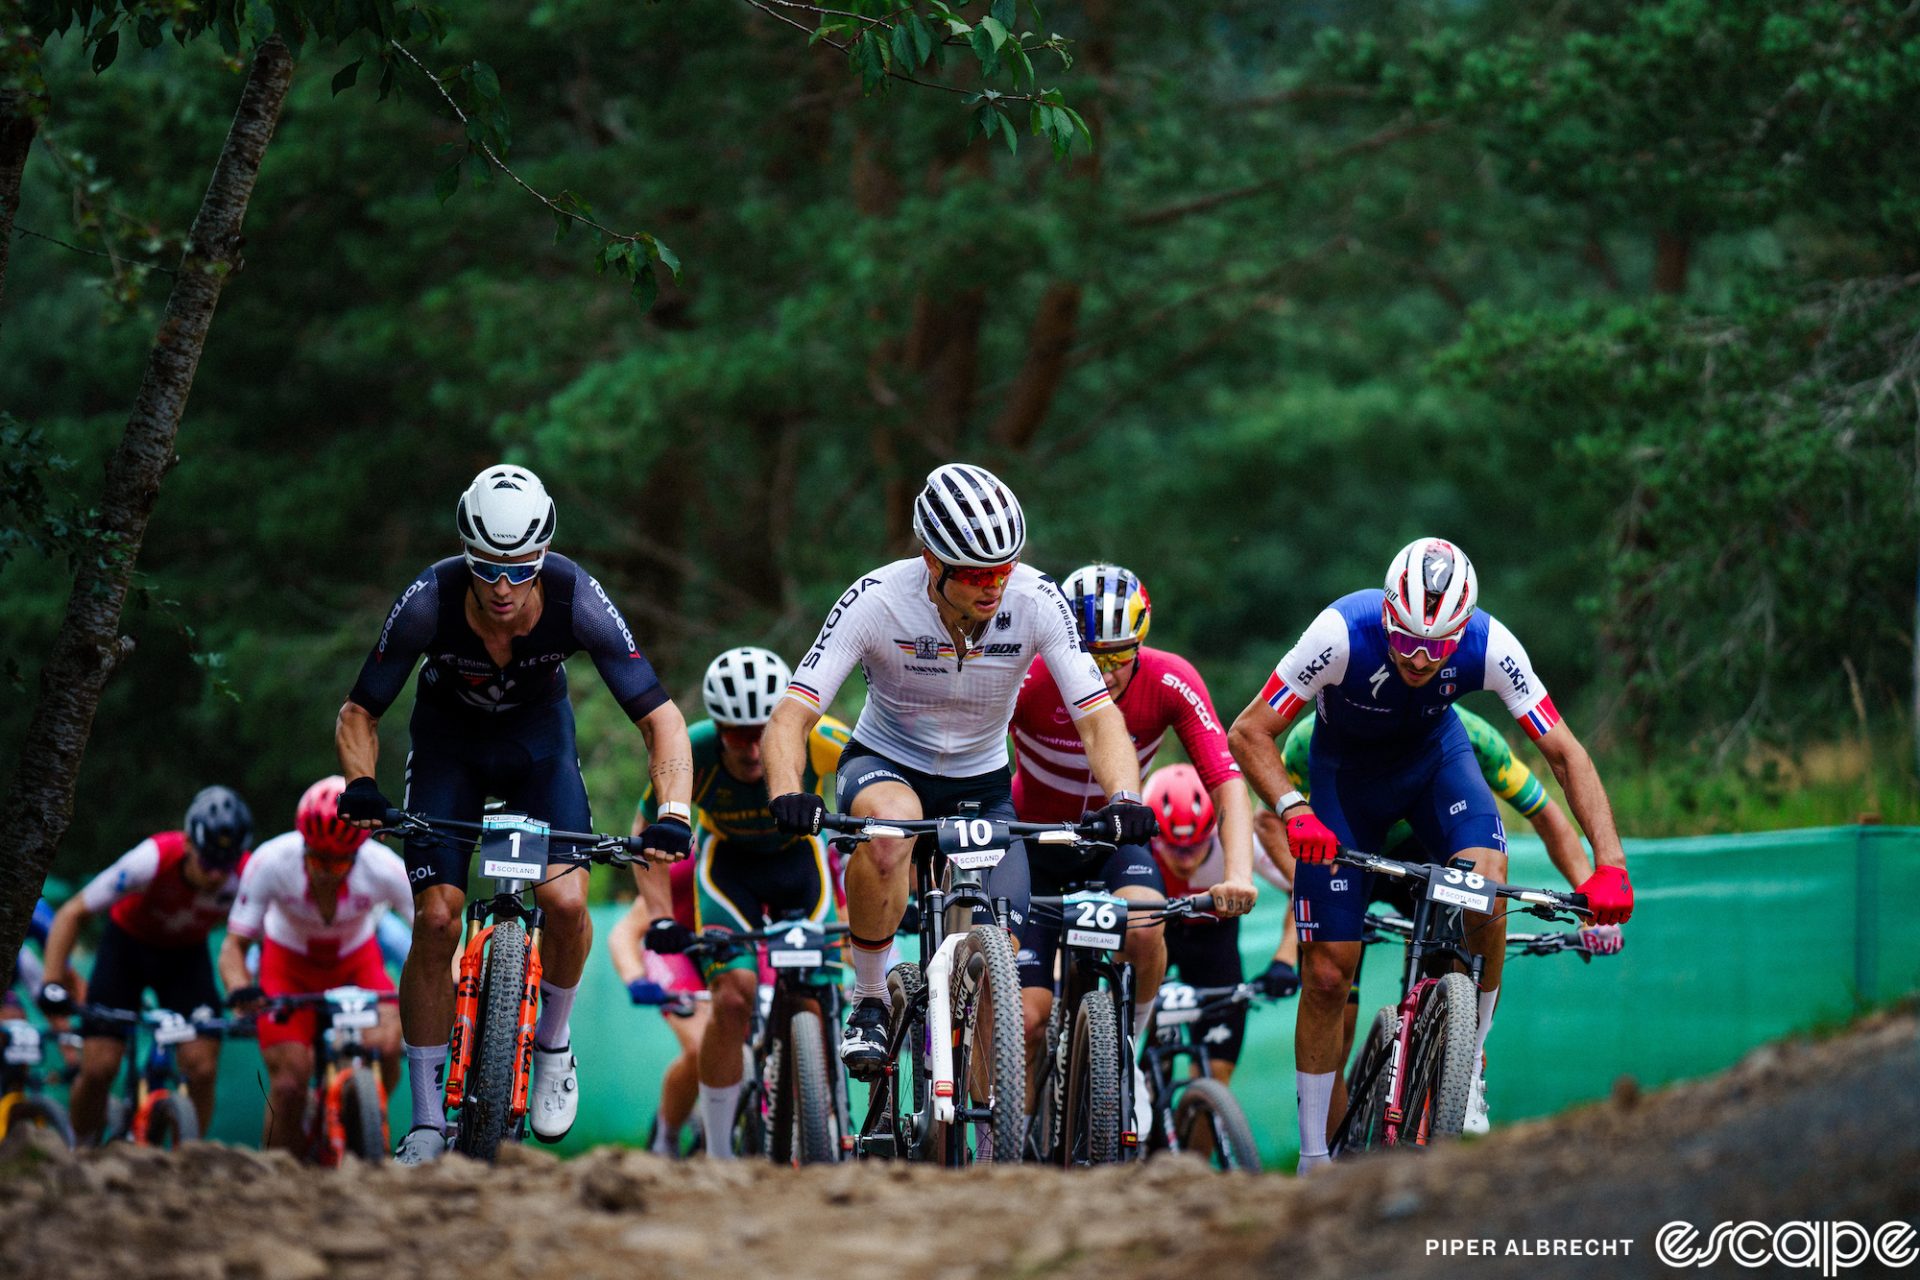 From left to right, Sam Gaze, Luca Schwarzbauer, and Victor Koretzky lead the men's field in the short track at the 2023 World MTB Championships. Koretzky is out of the saddle and Schwarzbauer is looking to his left as if to mark Koretzky's move. Gaze is looking straight ahead as the pack rides up a short climb.